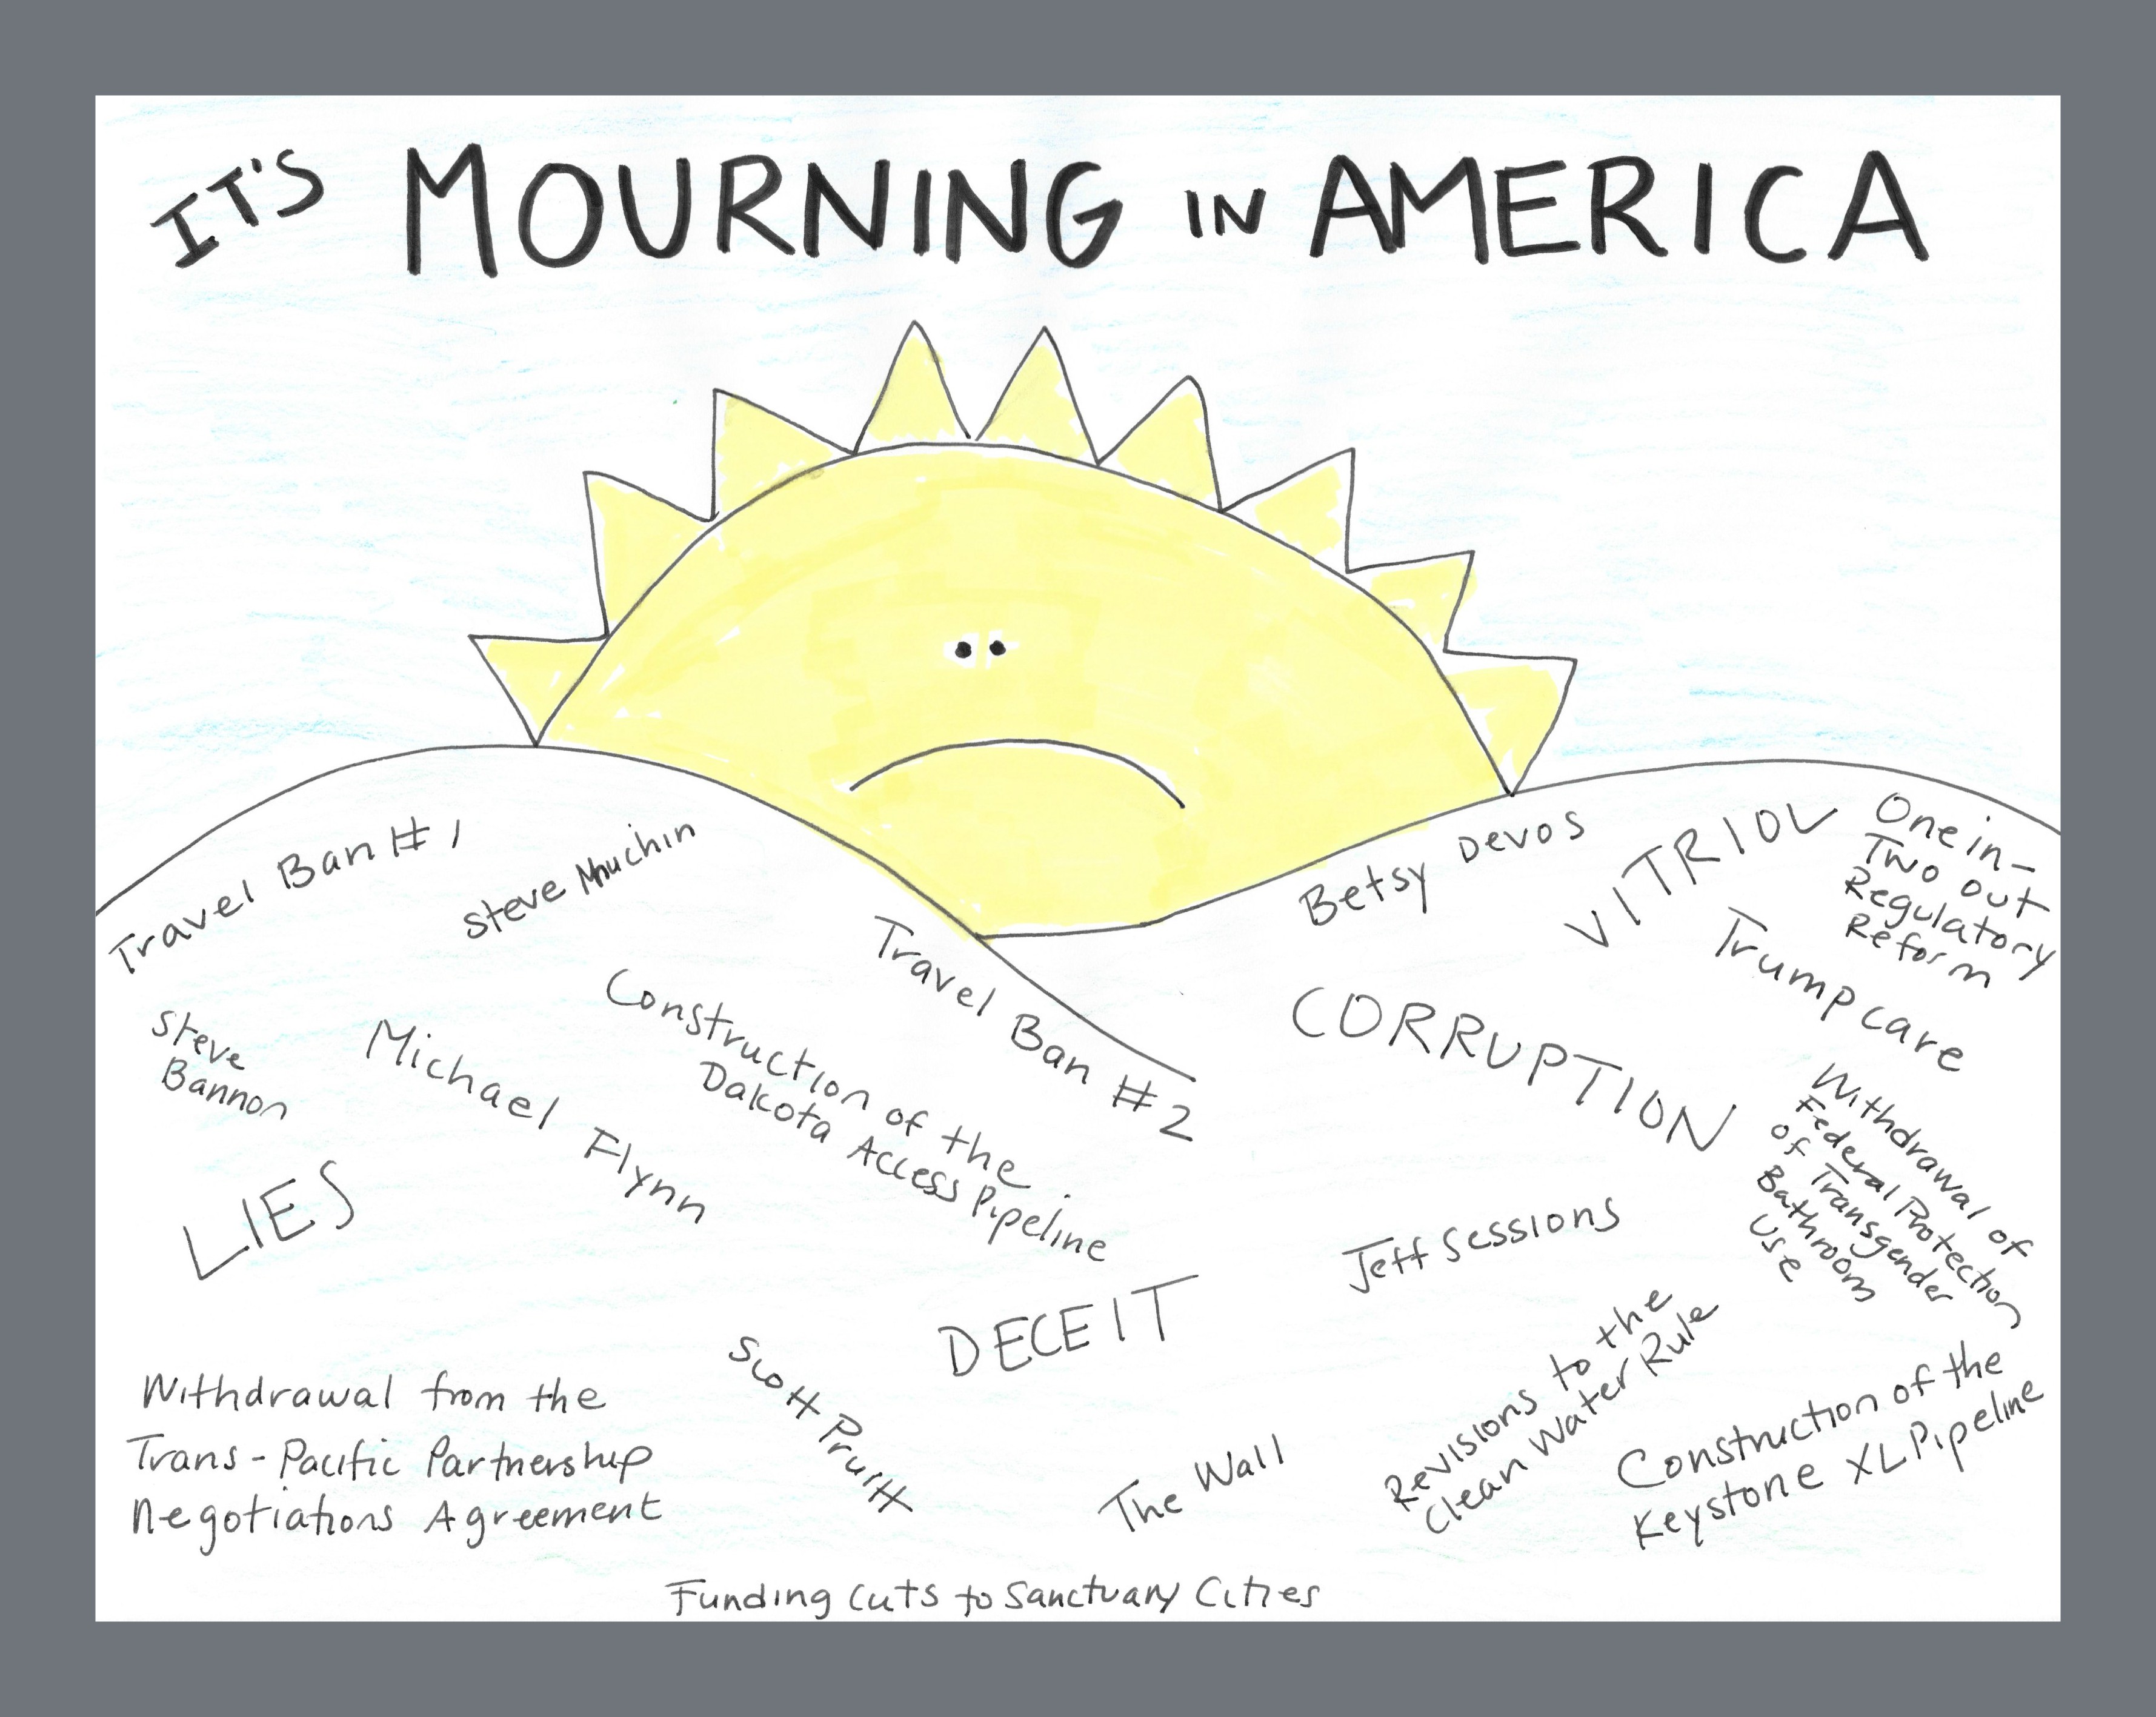 Mourning in America